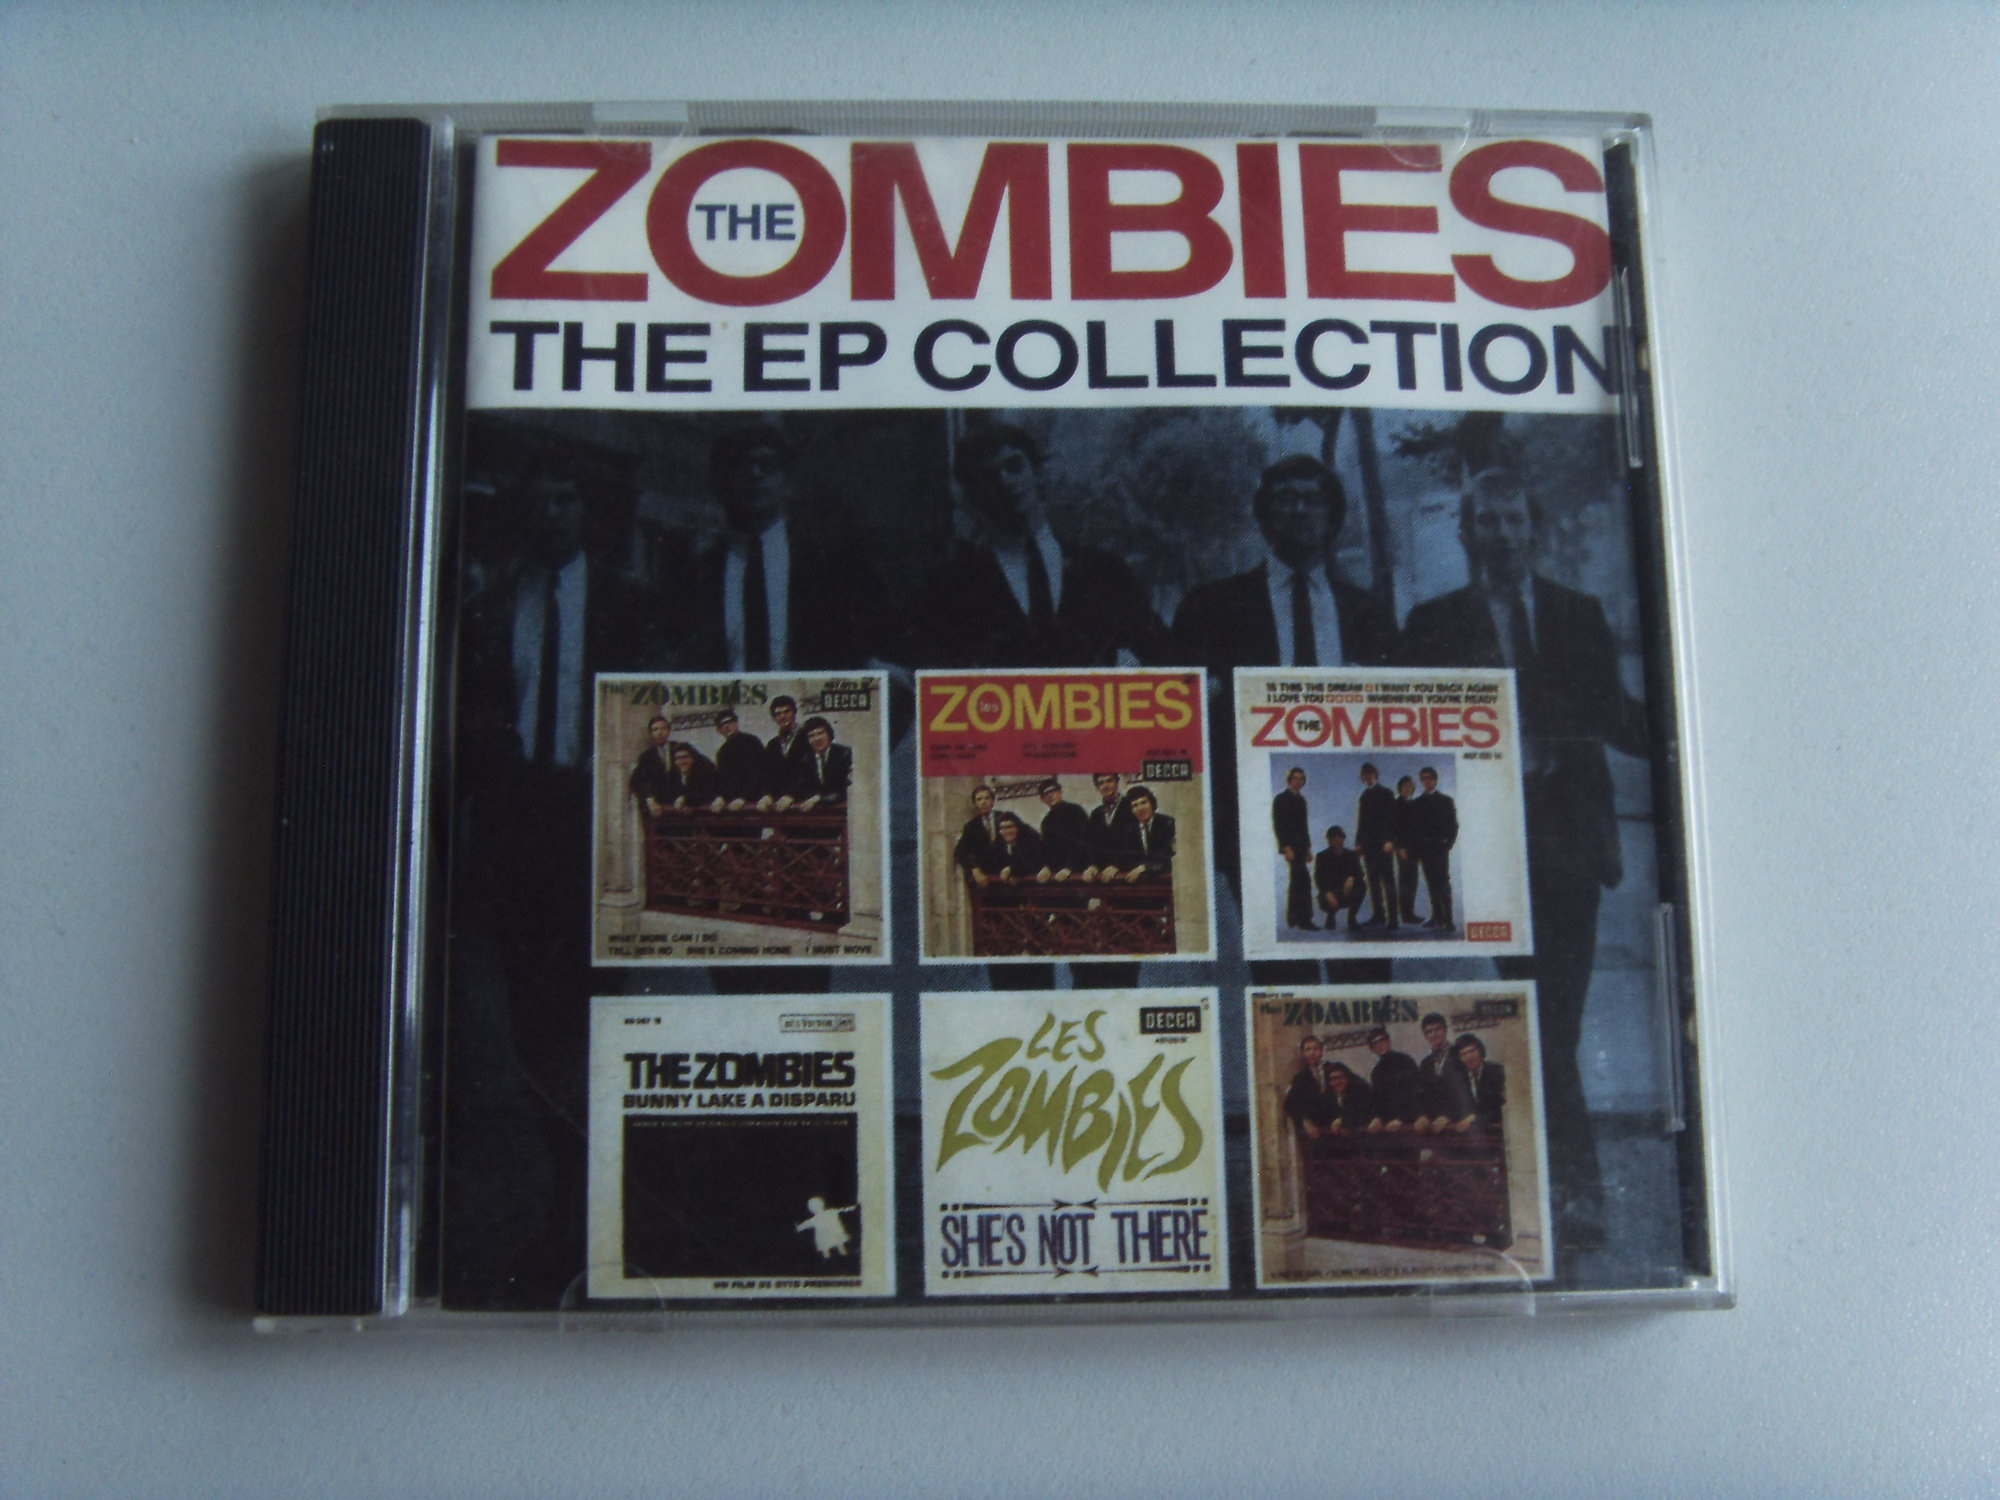 THE ZOMBIES The EP collection